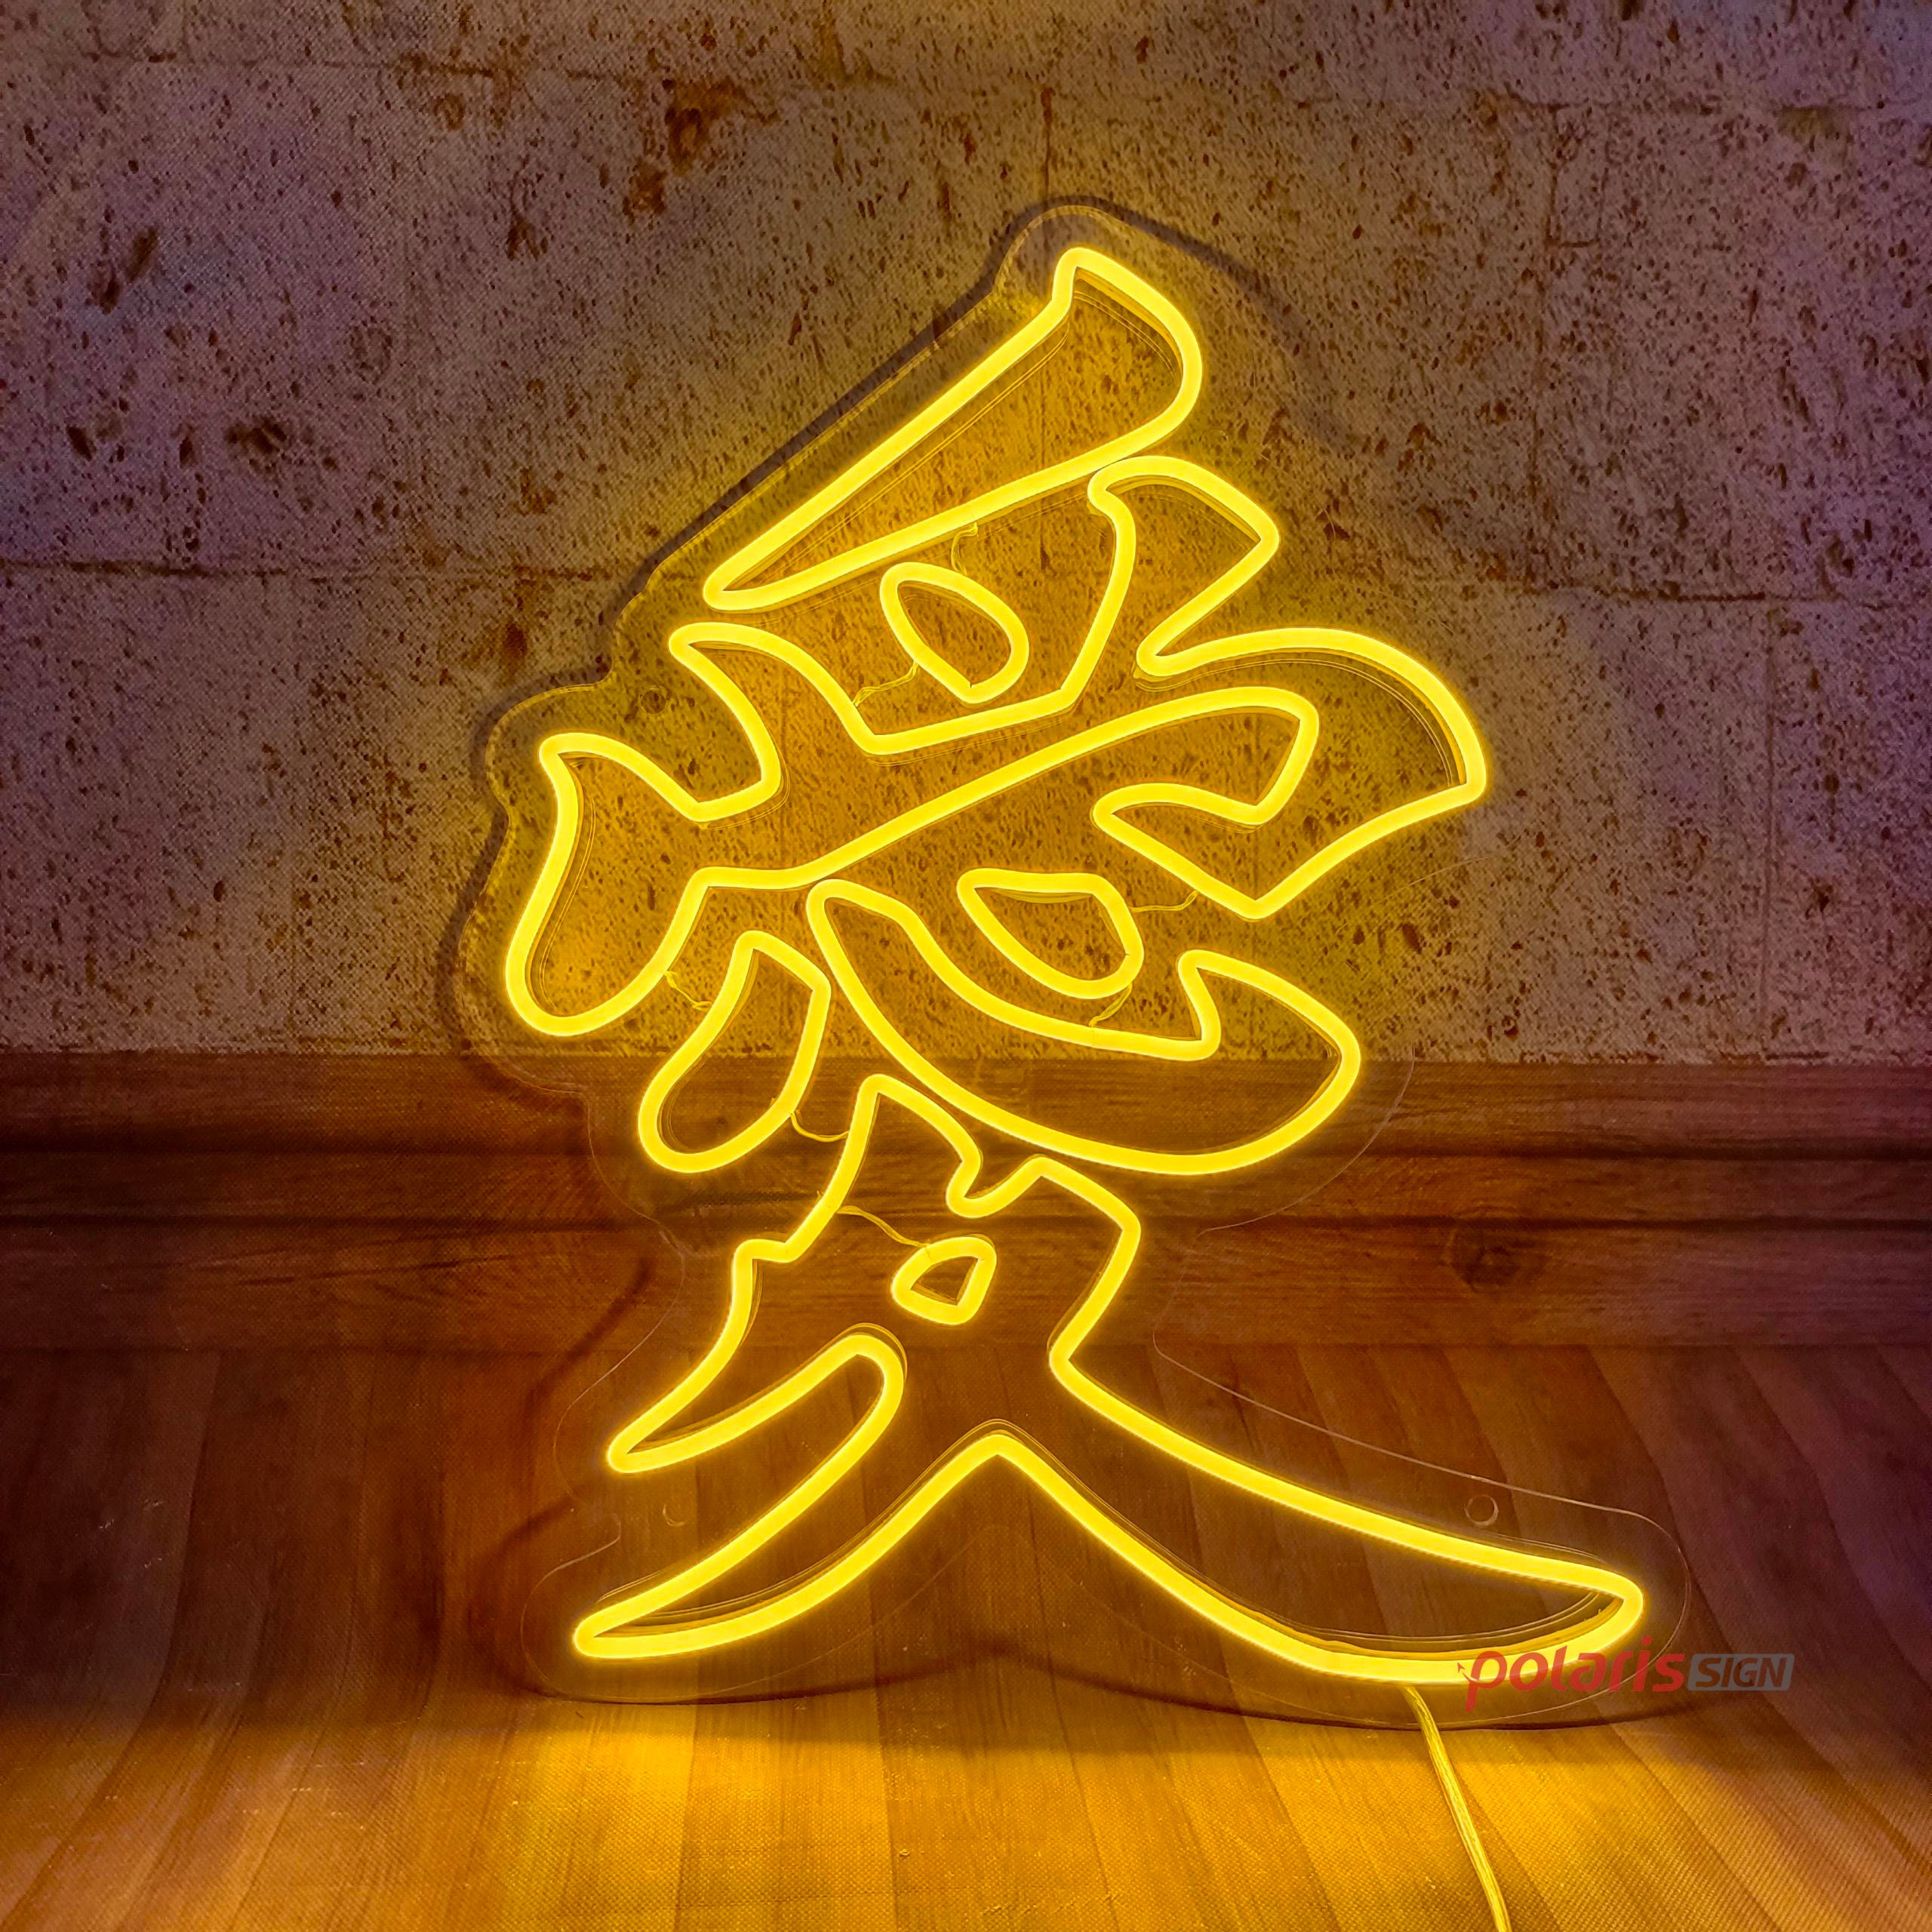 Neon Sign Of Chinese Hieroglyph Means Power In Circle Frame With